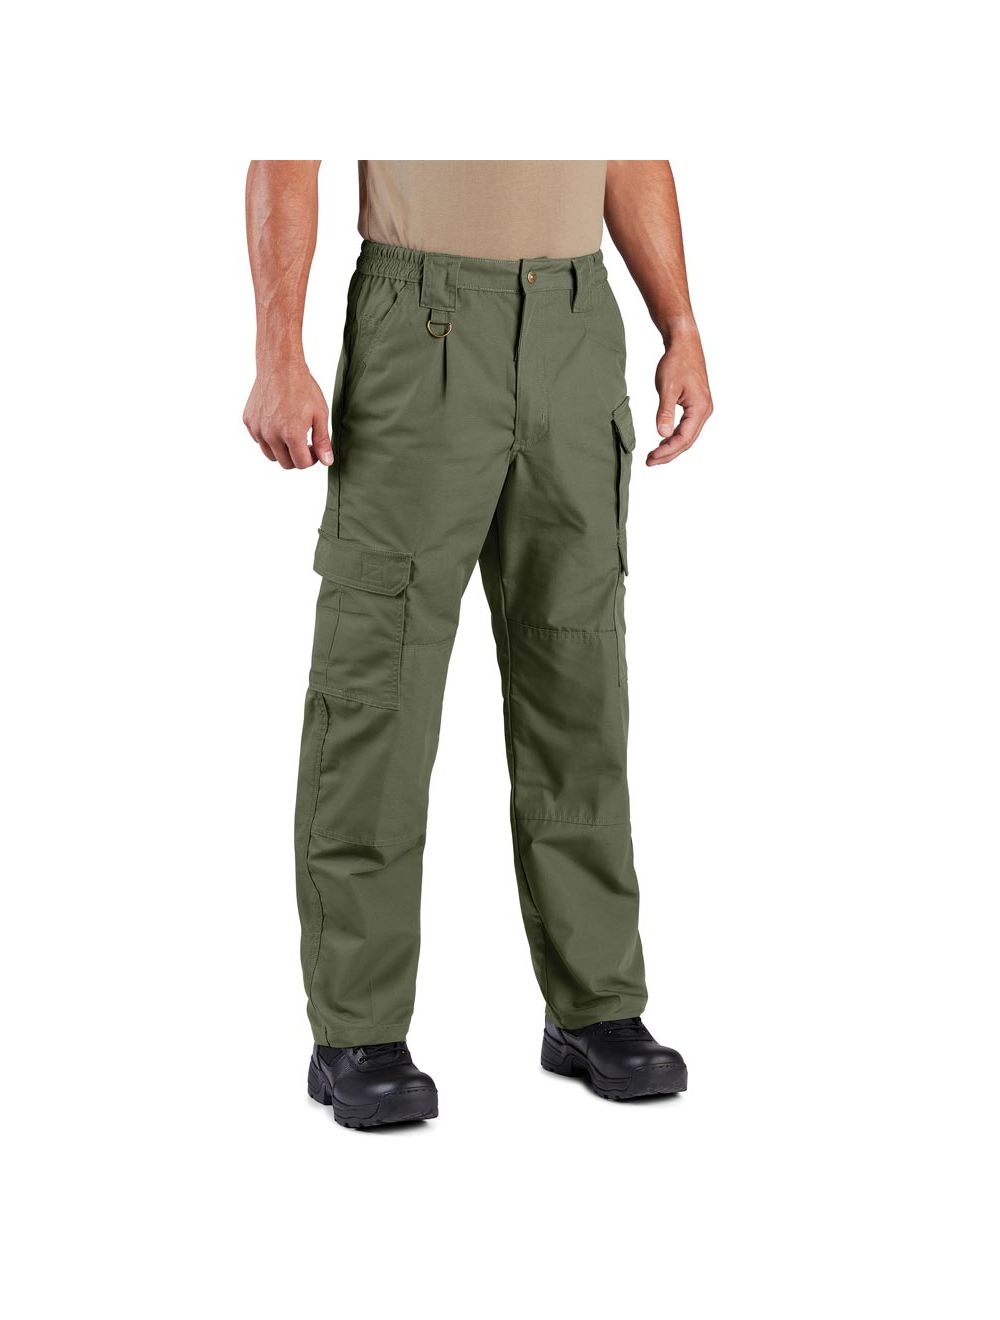 Propper F5252-50 Lightweight Men's Tactical Trousers - Ripstop